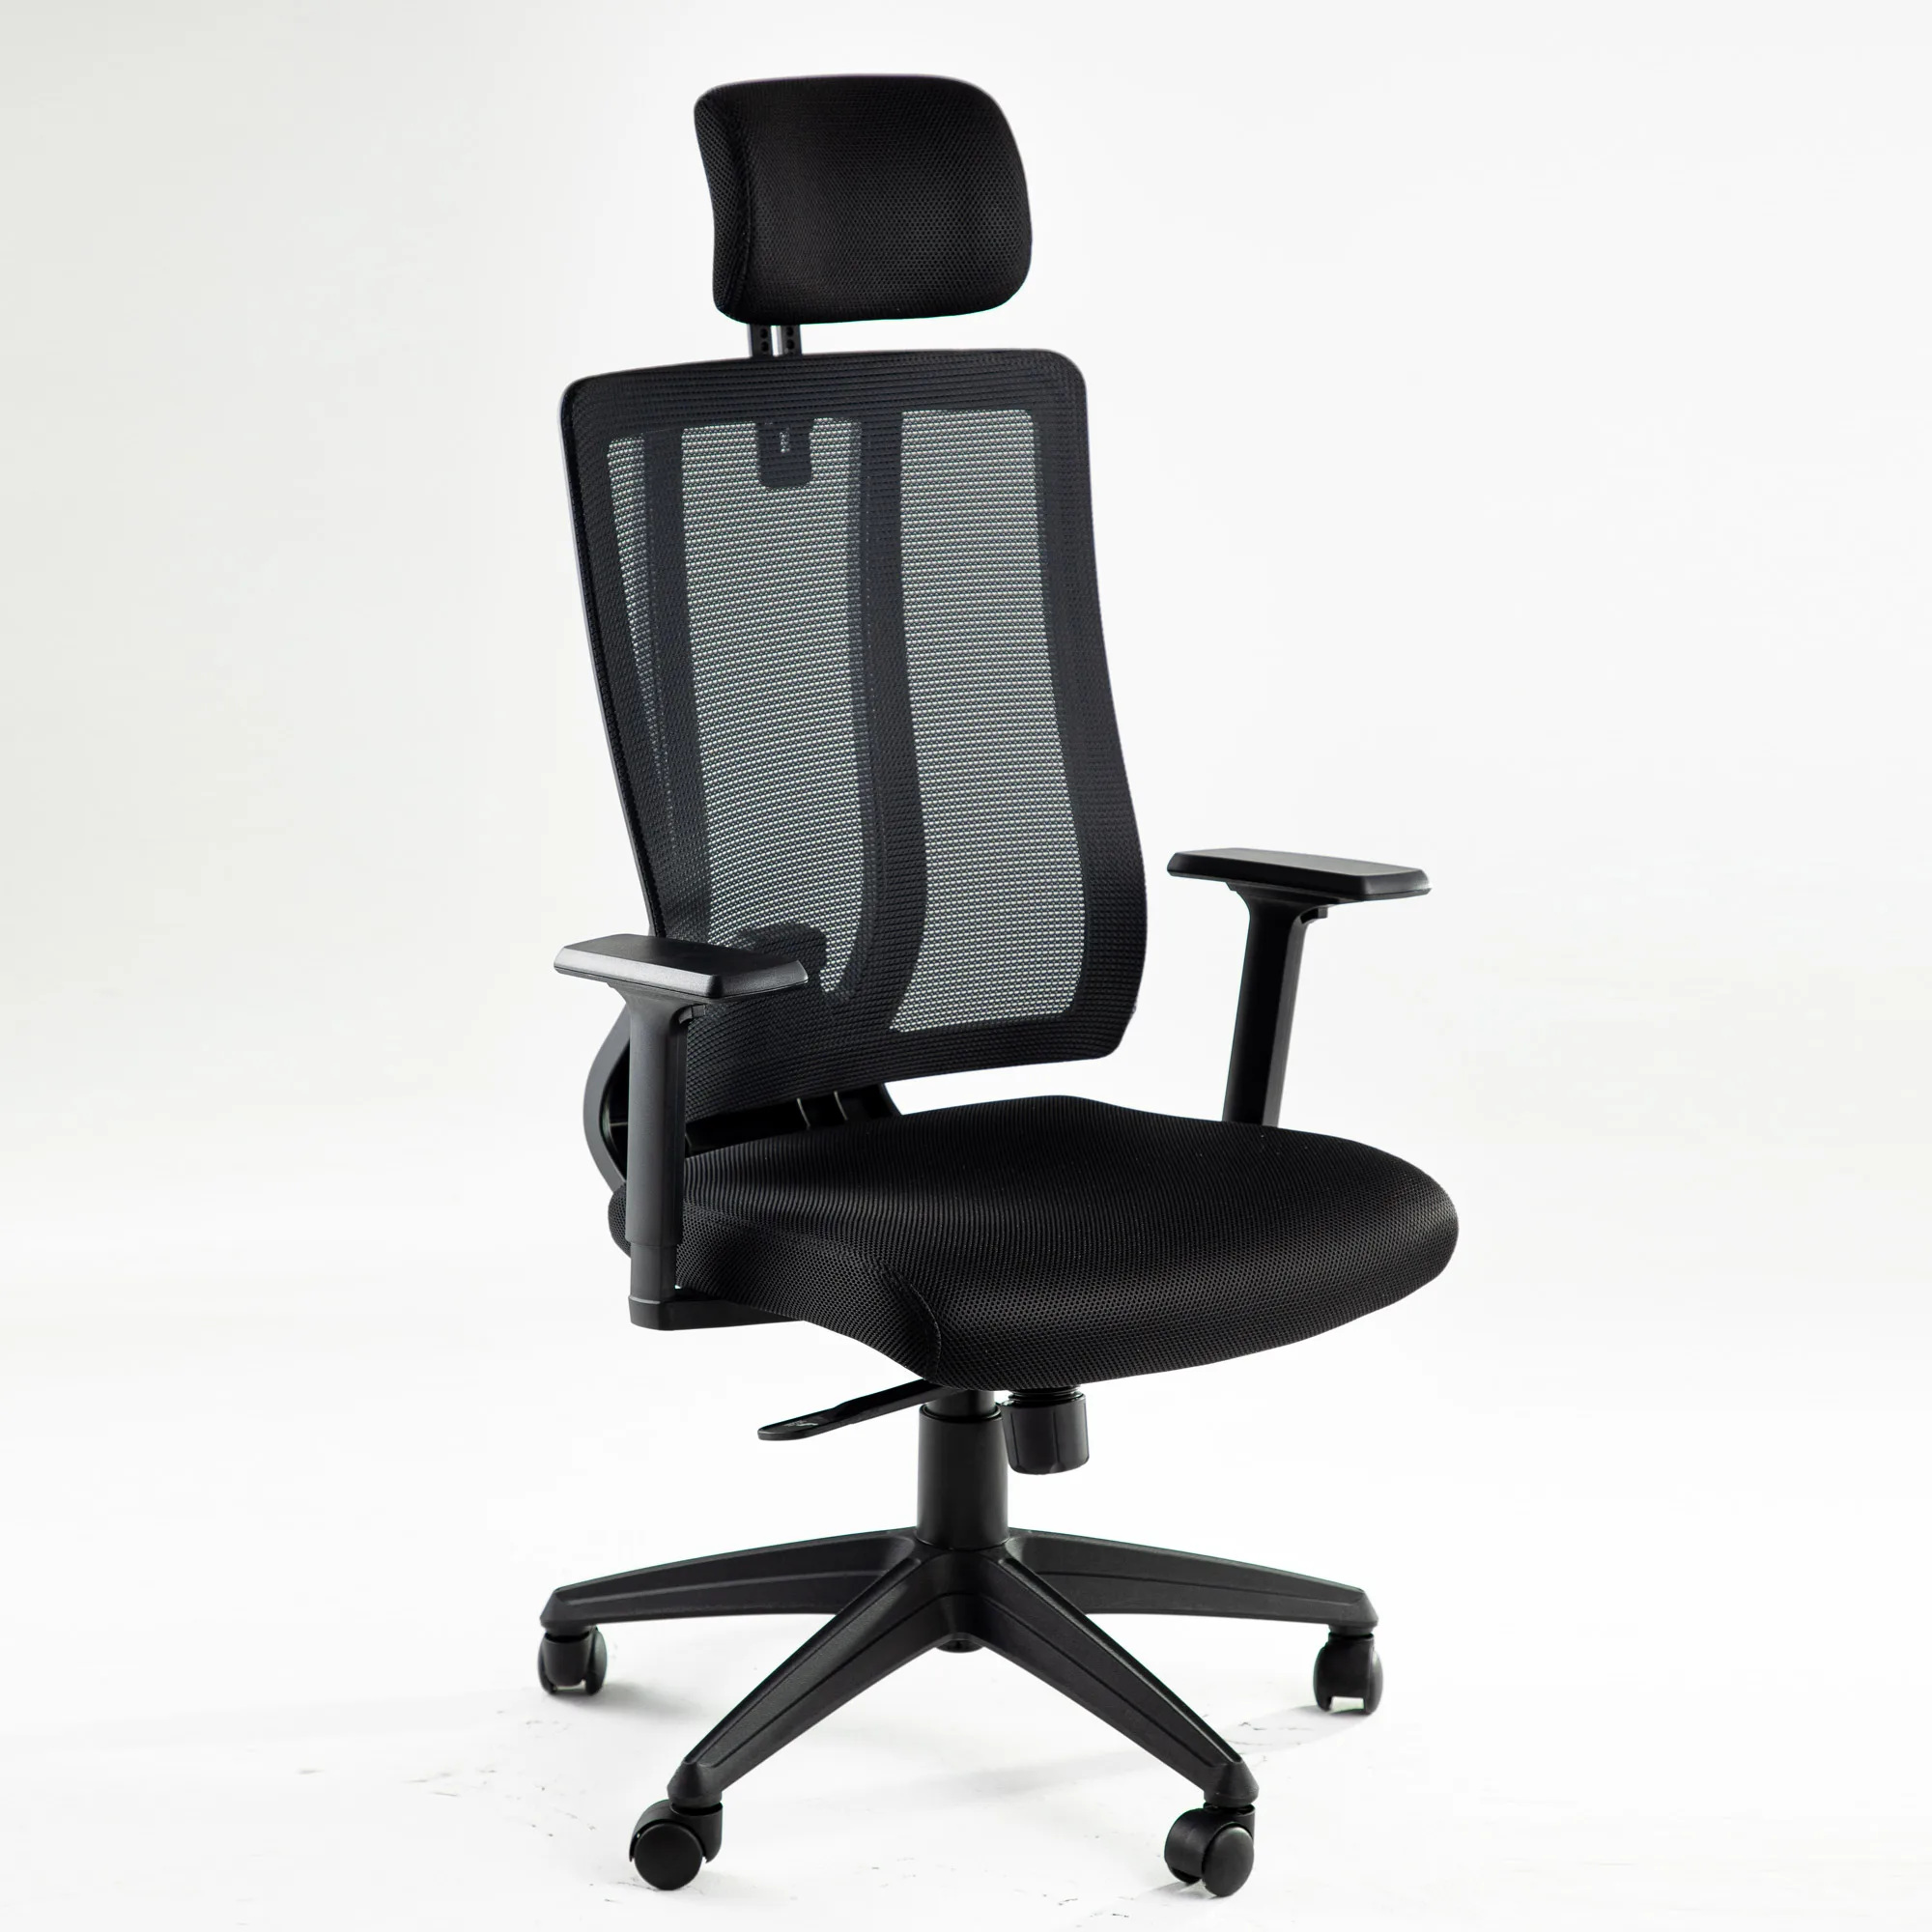 

Office Ergonomic Task Chair High-Back Lumbar Mesh Support Computer Chair Multifunction Executive Swivel with Head&Arm Rest Black